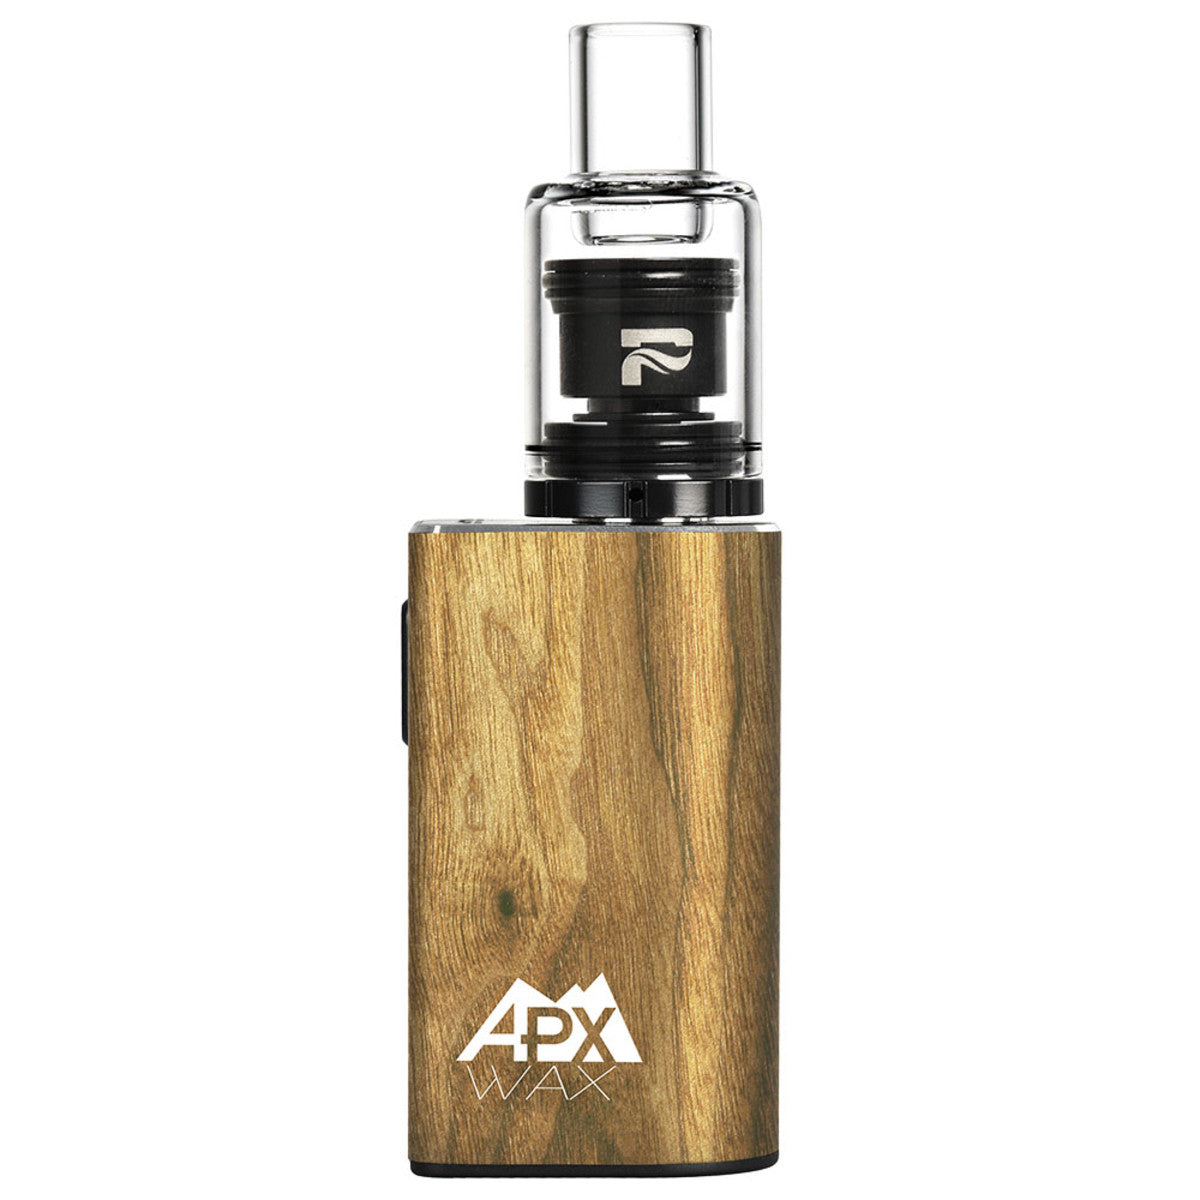 pulsar apx wax v3 concentrate vaporizer wood grain limited edition